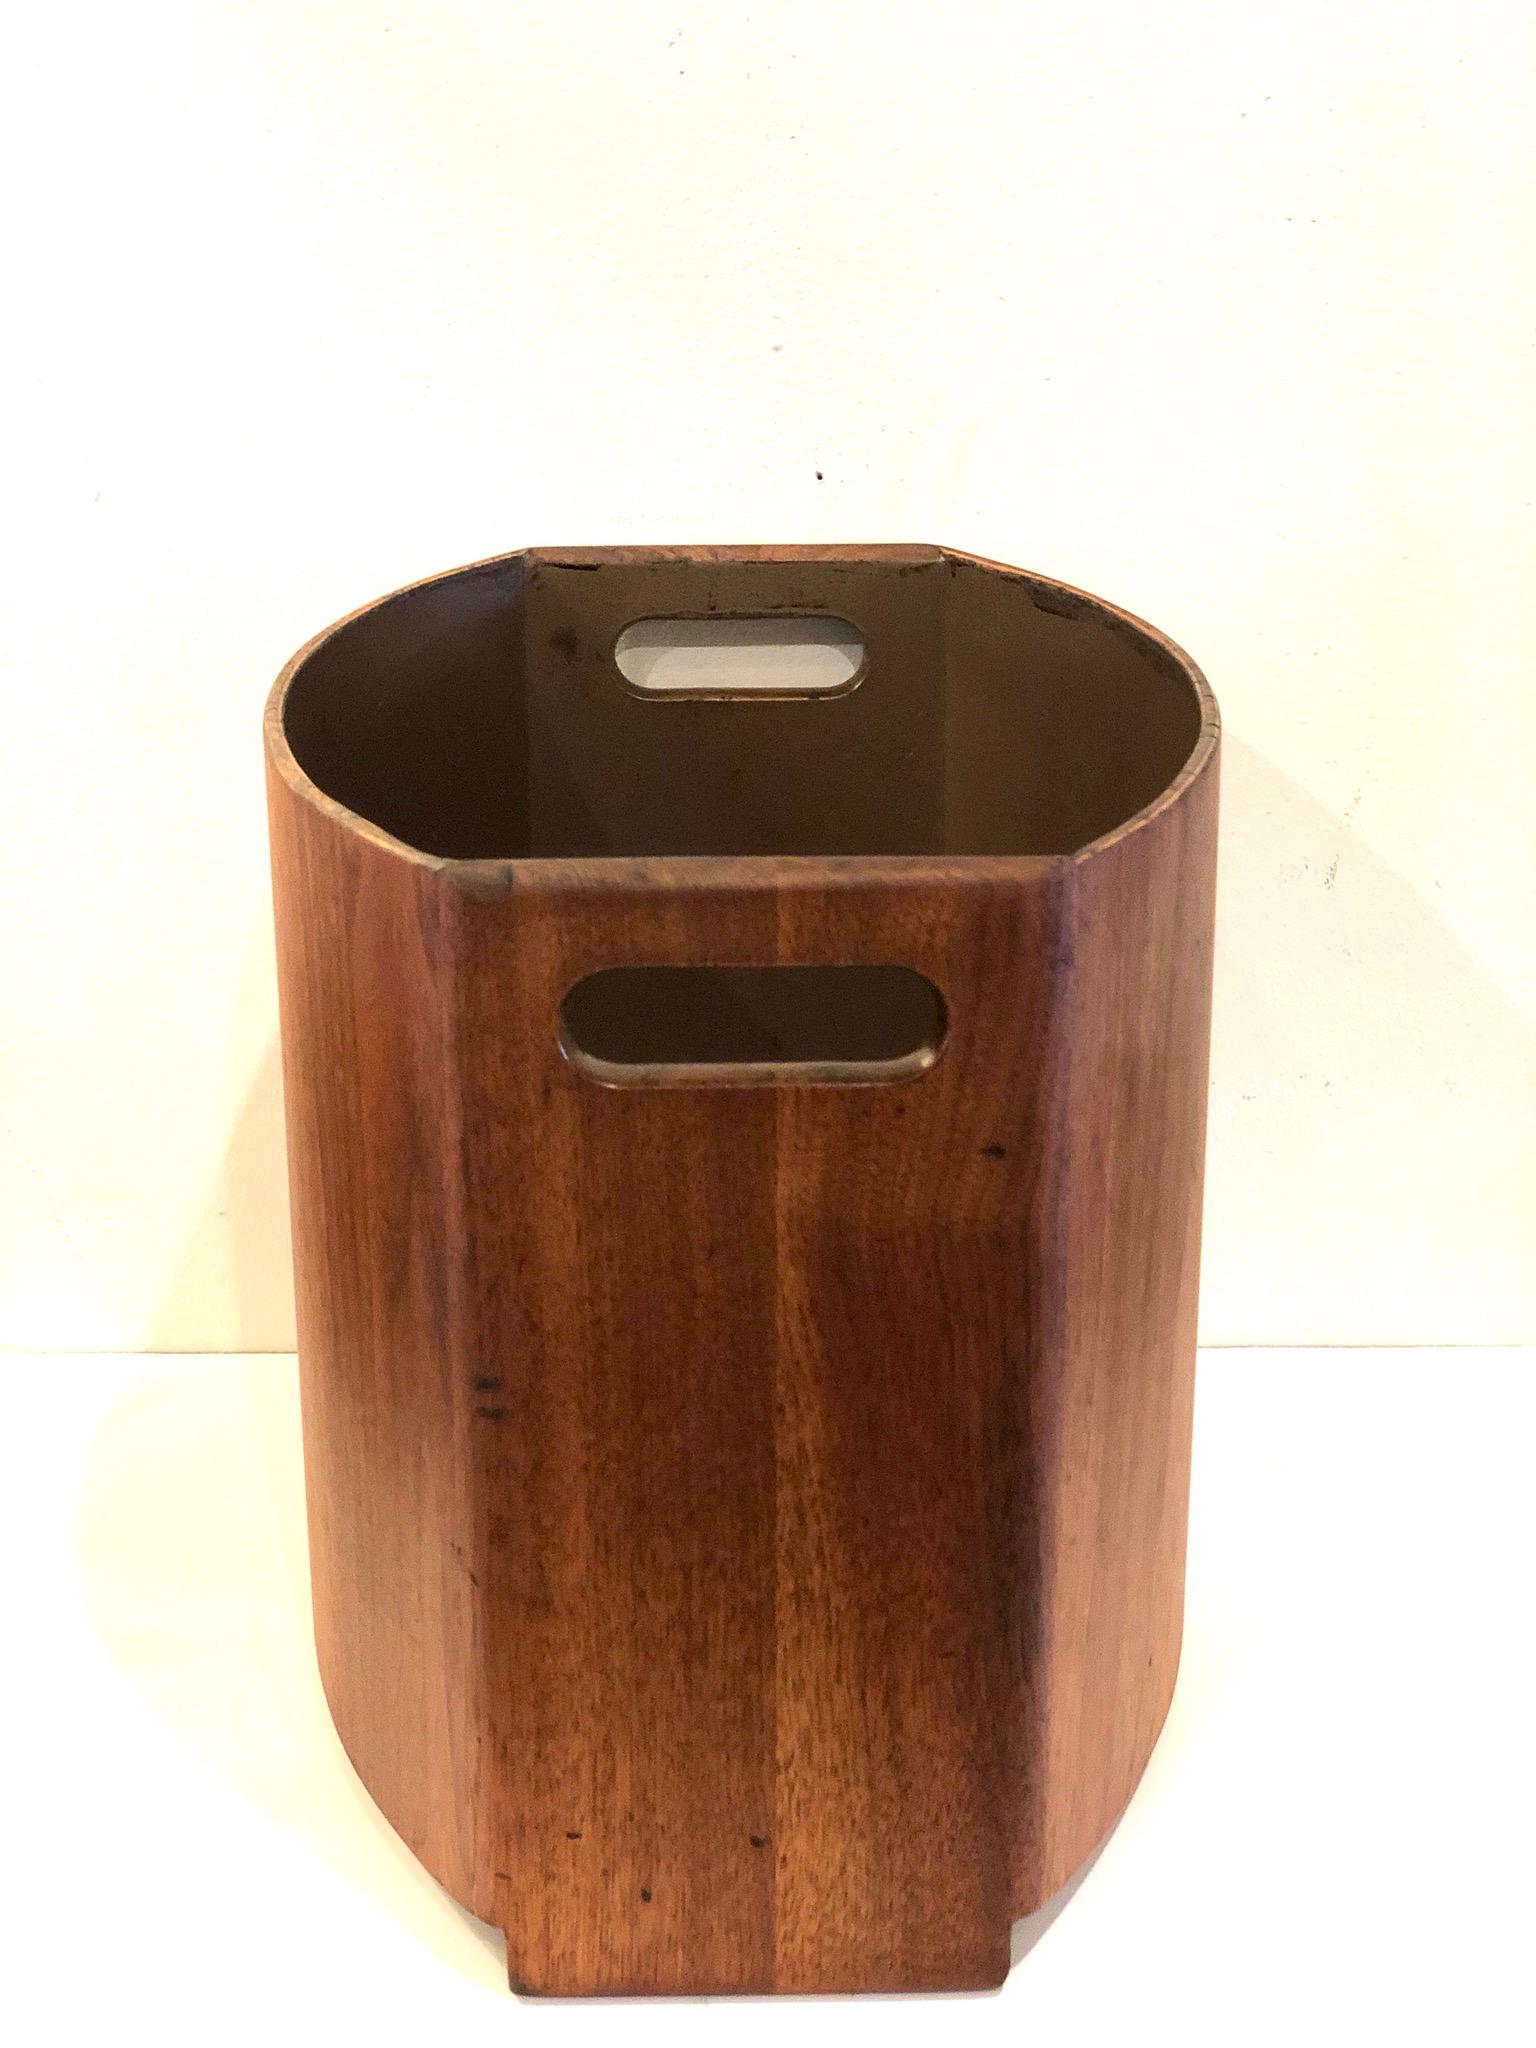 Art Deco American Mid-Century Modern Rare Large Wastebasket with Handles by Stow Davis